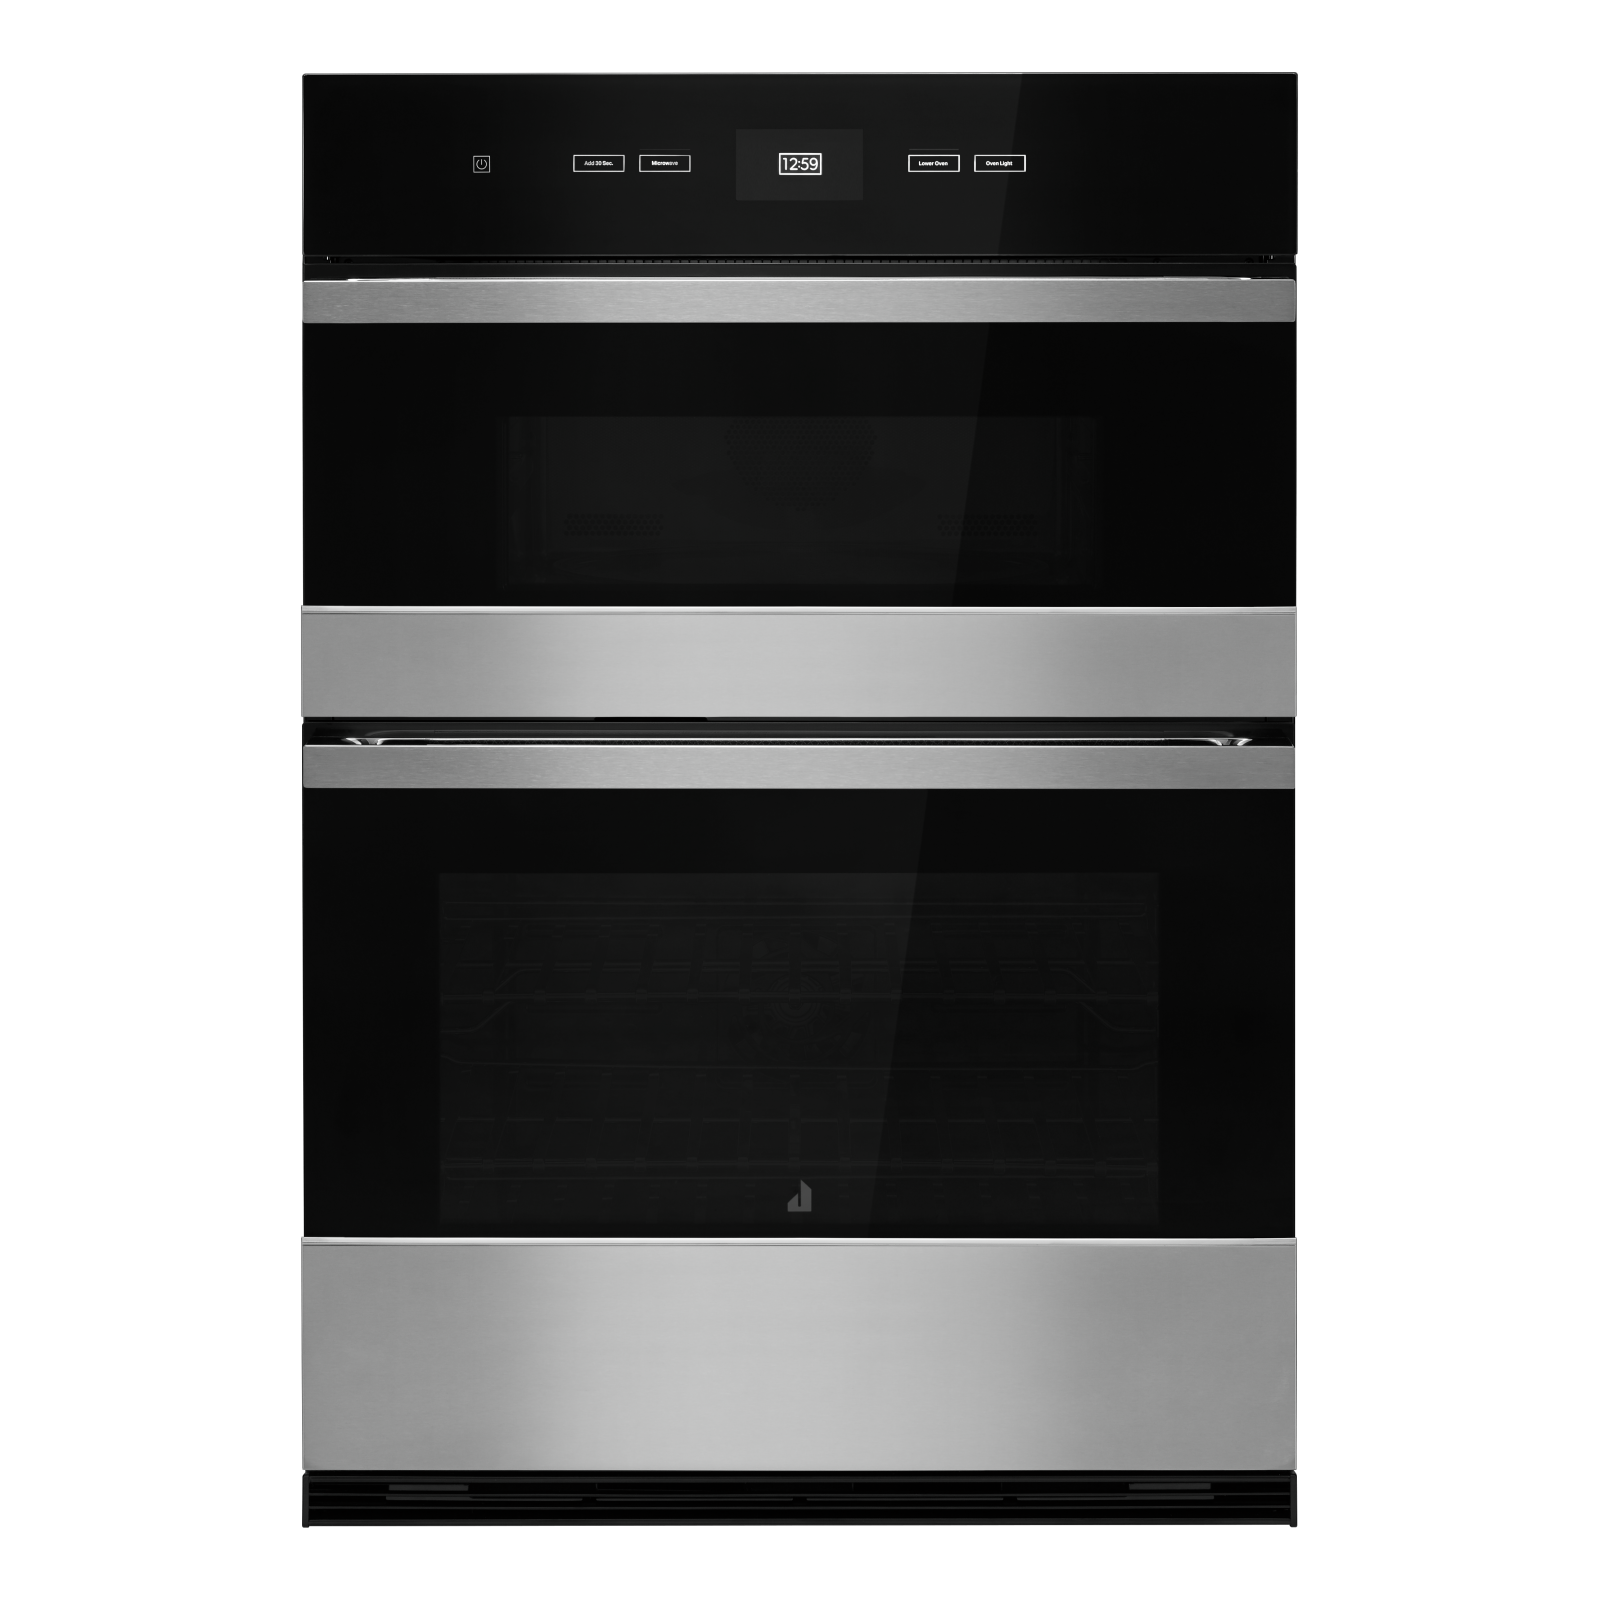 JennAir - 6.4 cu. ft Combination Wall Oven in Black - JMW2430LM